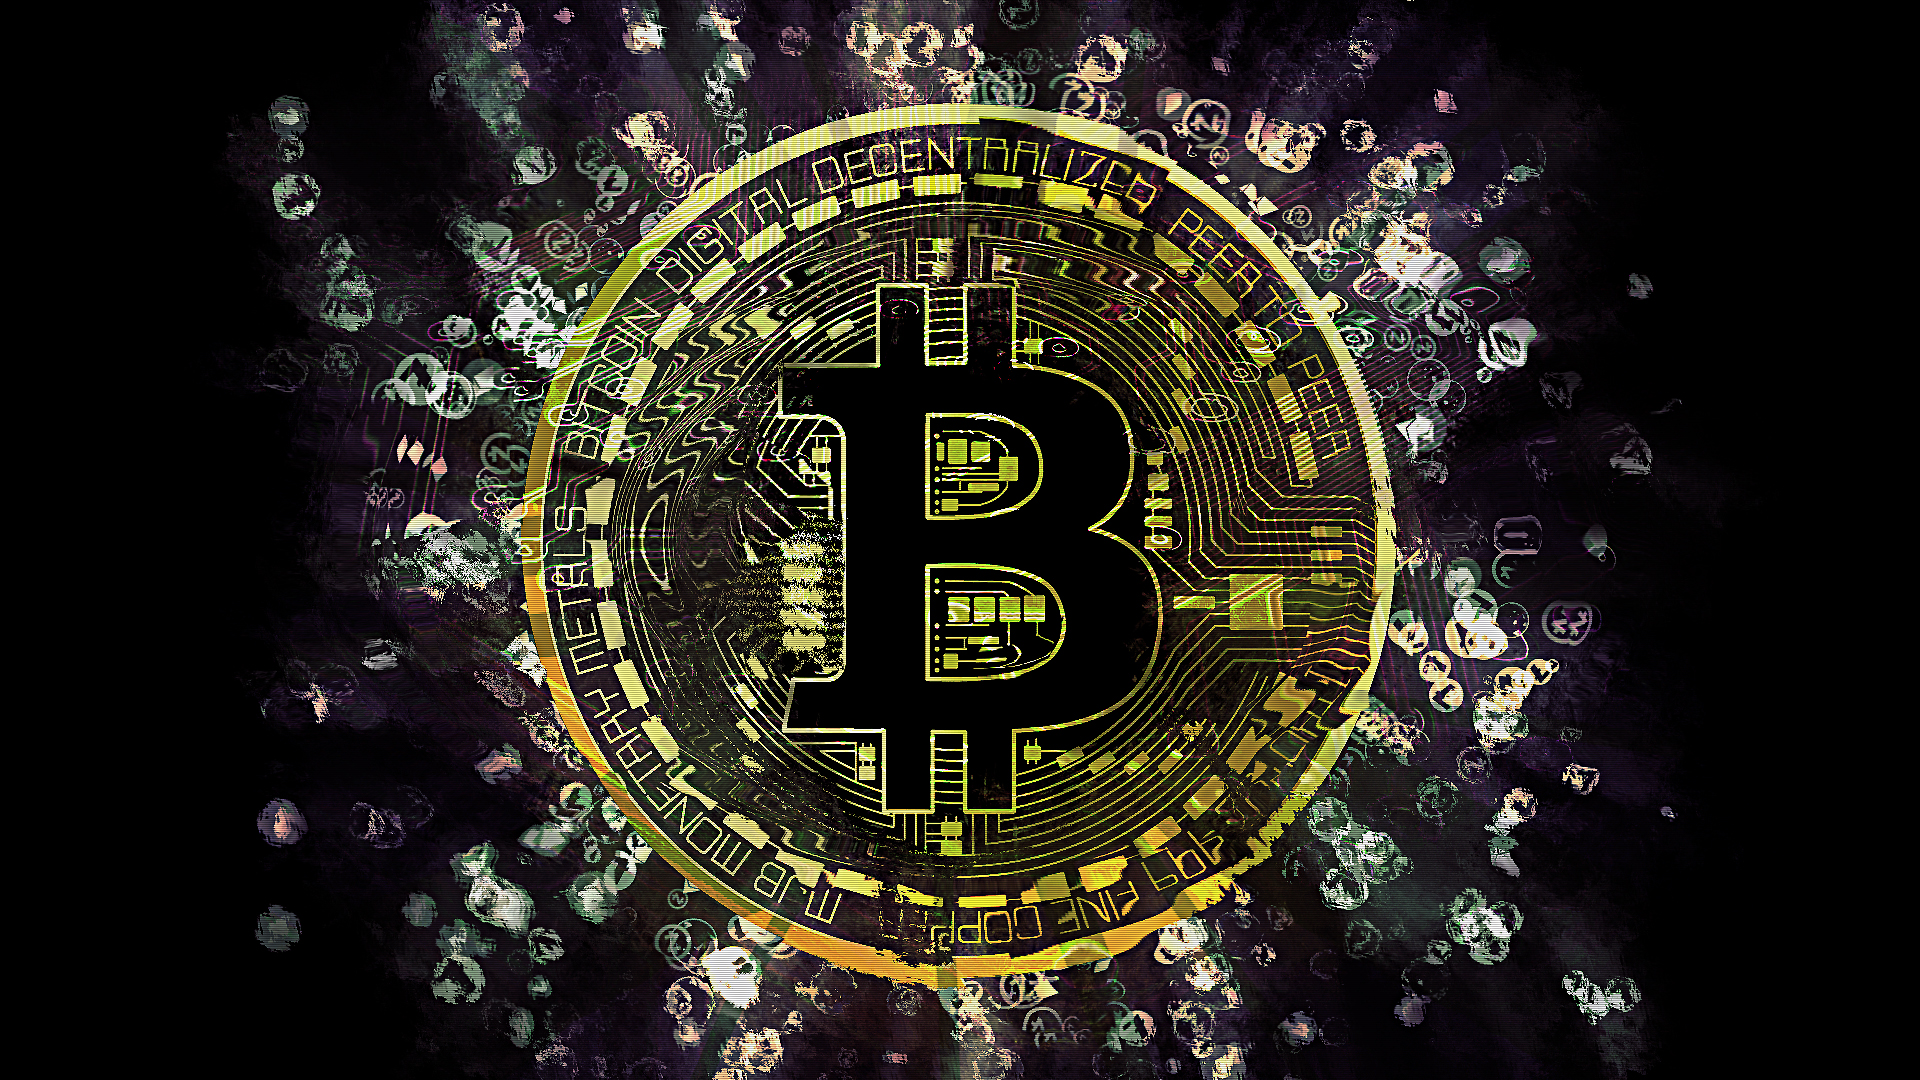 Wallpaper, Bitcoin, cryptocurrency 1920x1080